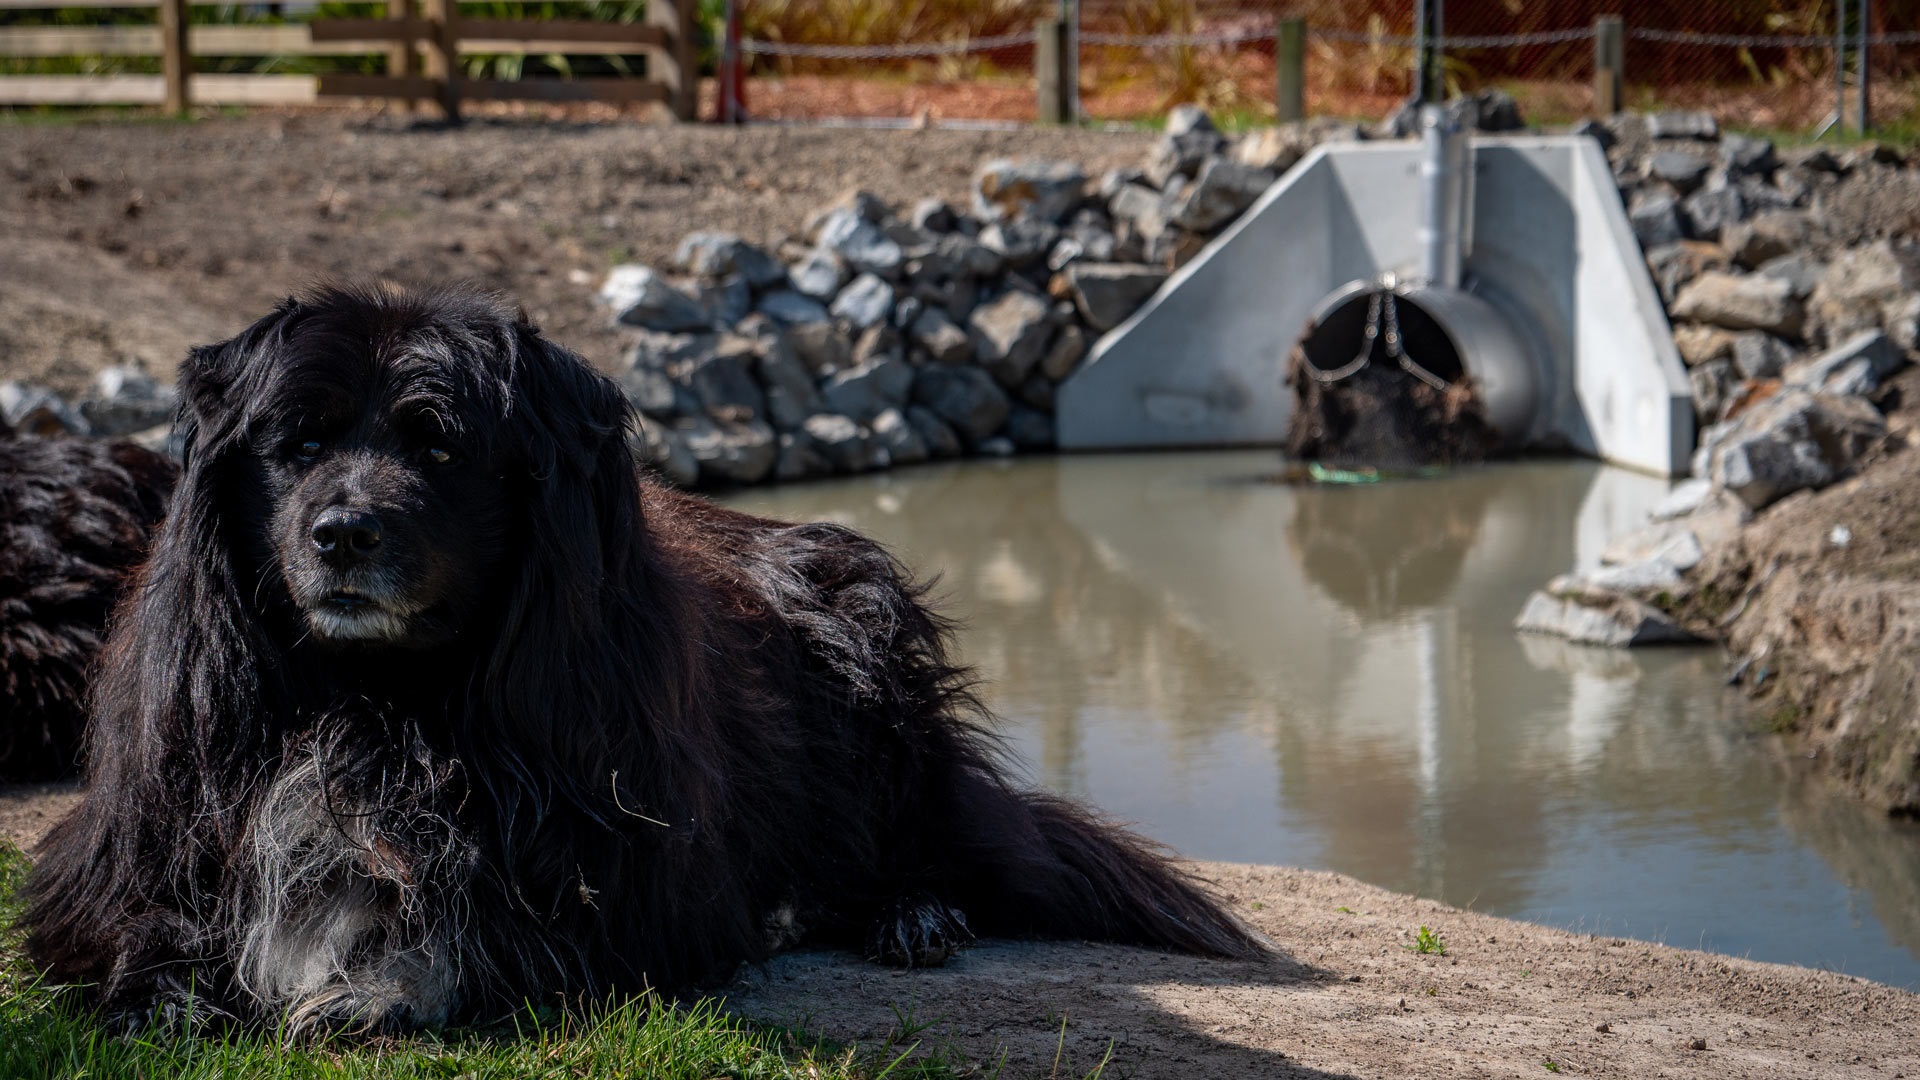 Image shows a black dog sitting in front of a pond and stormwater culvert.